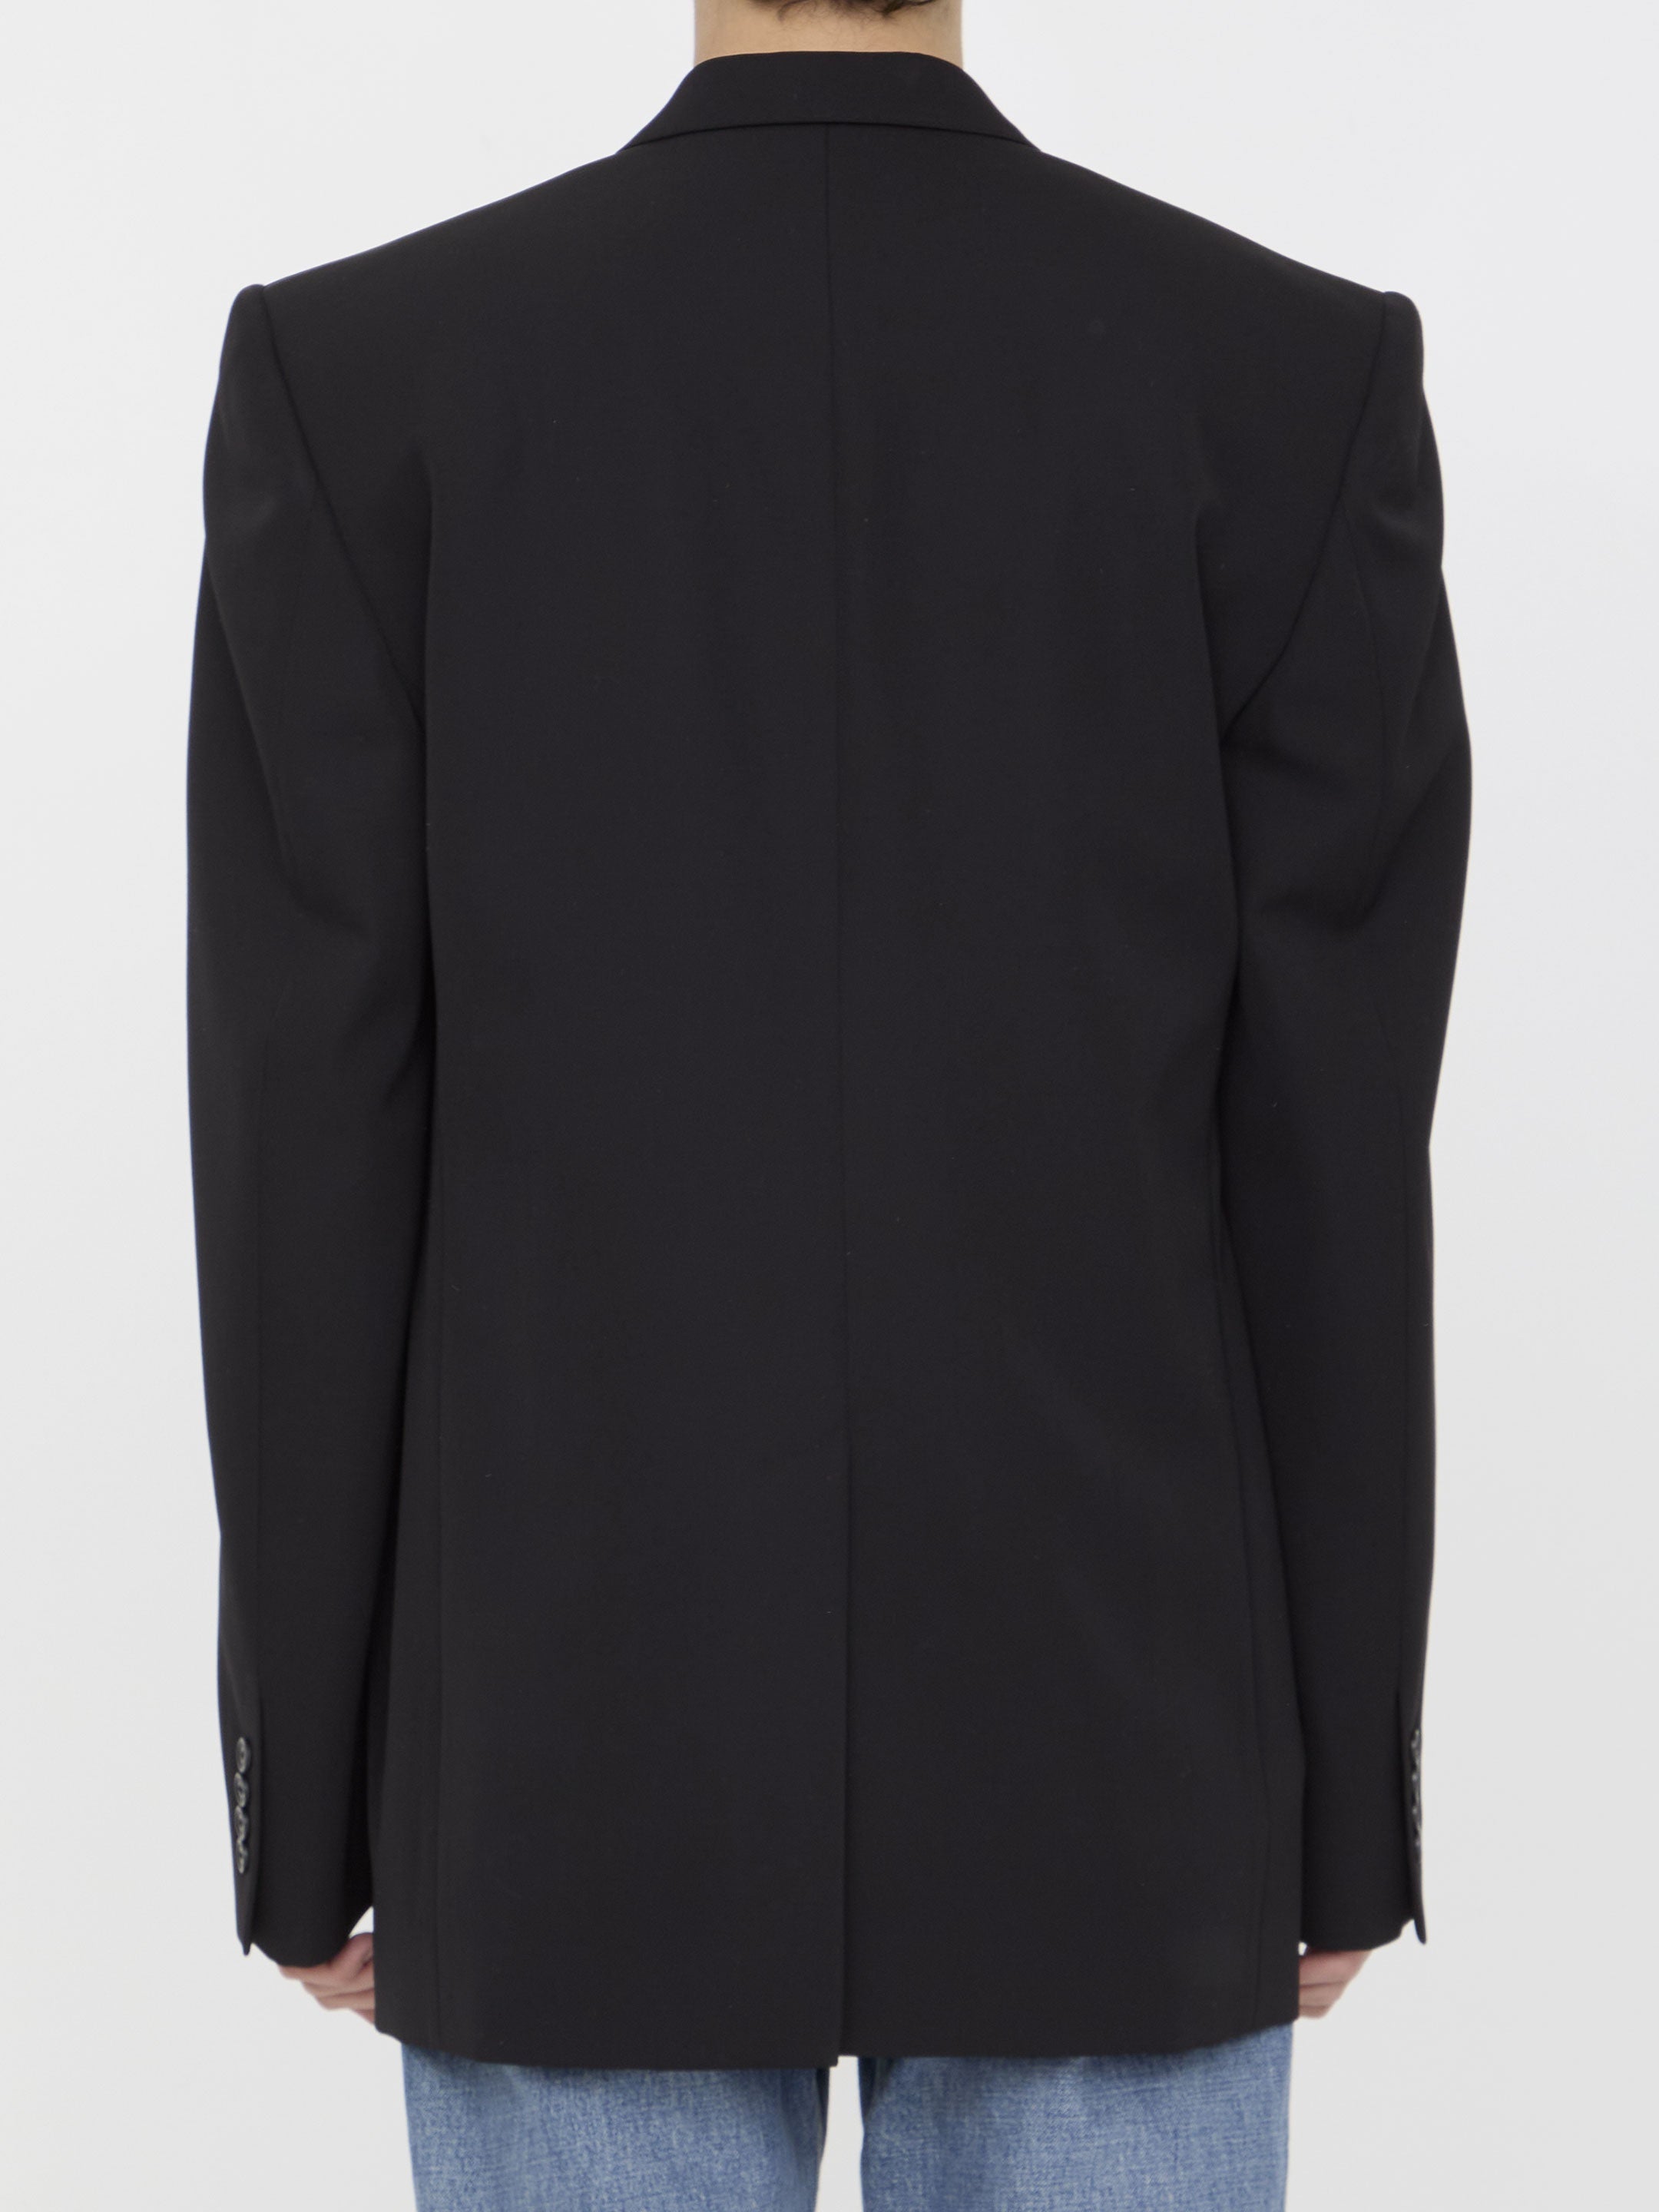 BALENCIAGA-OUTLET-SALE-Oversized-Blazer-CLOTHING-XS-BLACK-ARCHIVE-COLLECTION-4.jpg